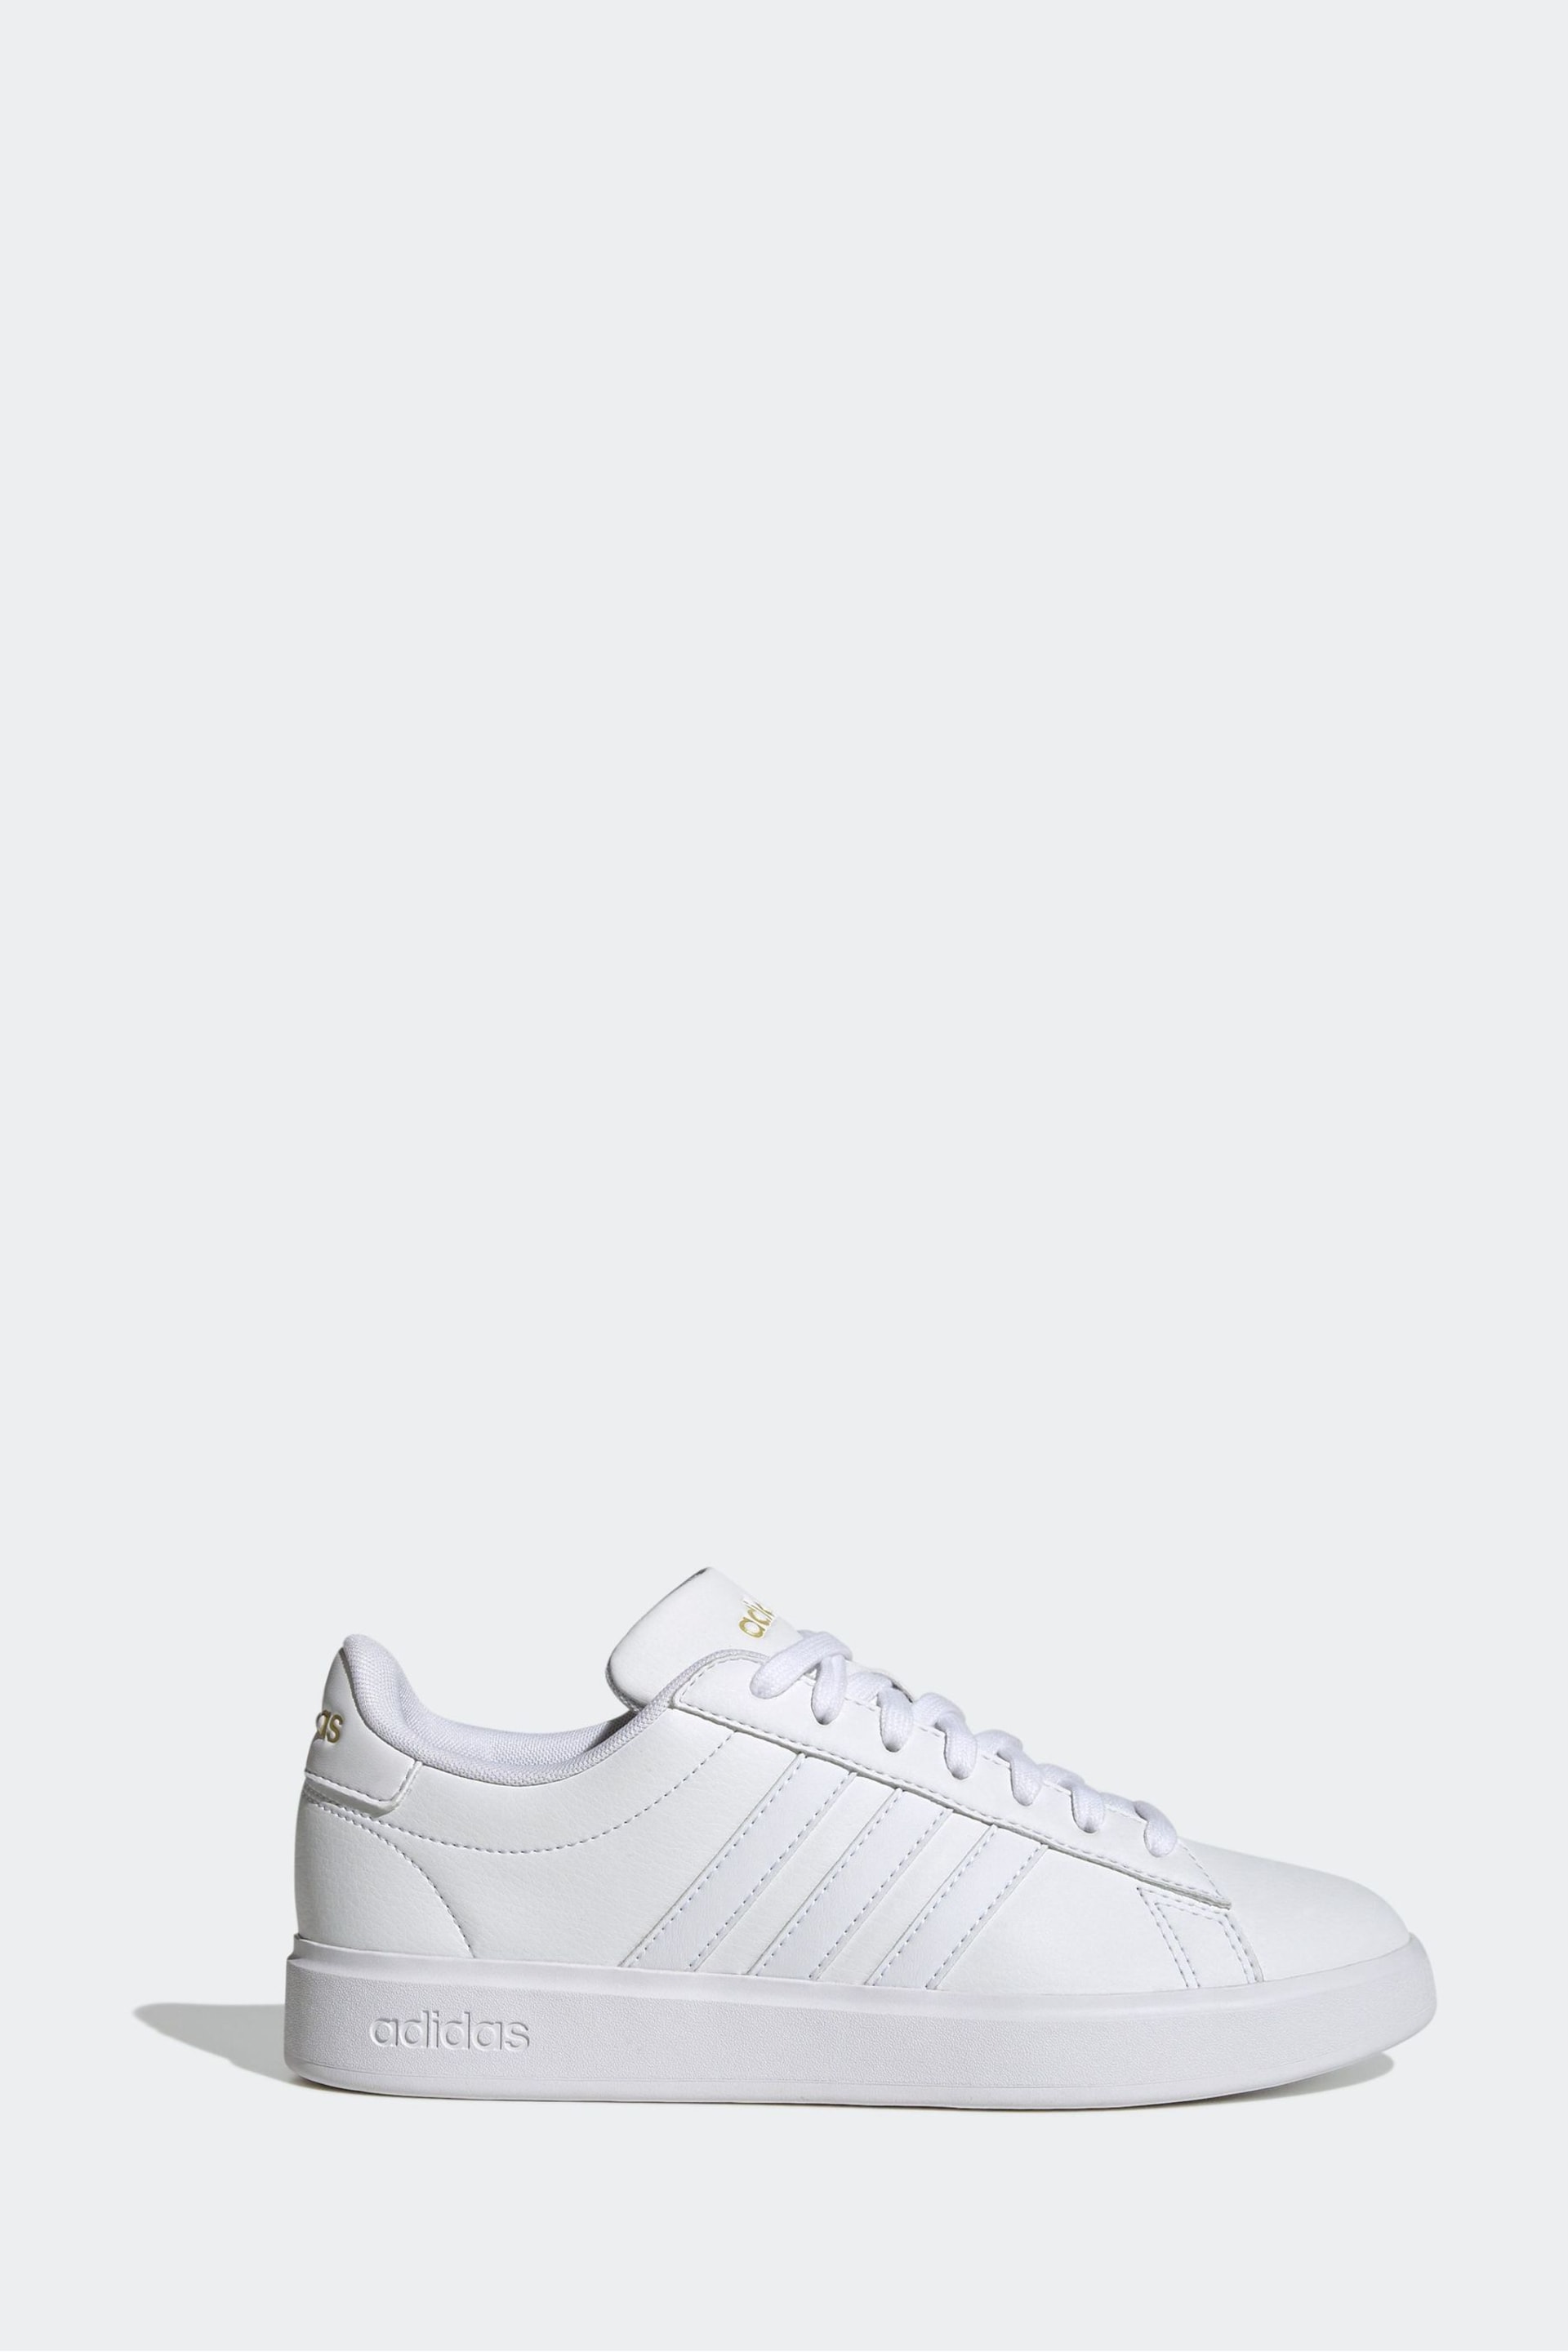 adidas White Grand Court Cloudfoam Lifestyle Comfort Trainers - Image 1 of 9